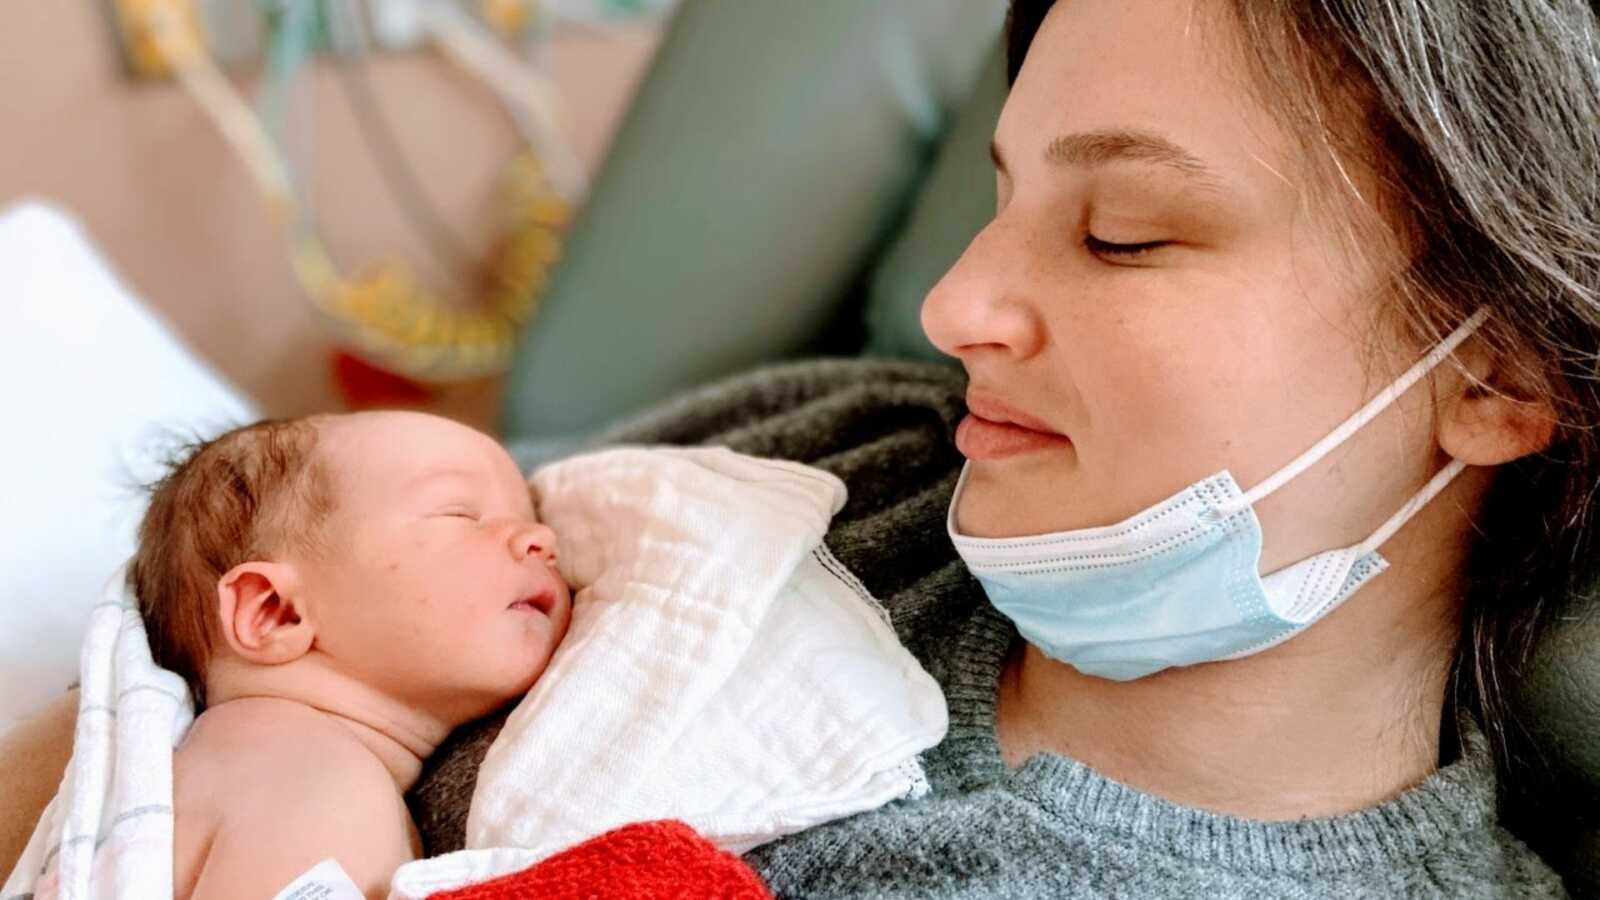 Mom shares tender moment with sleeping newborn son while still in the hospital